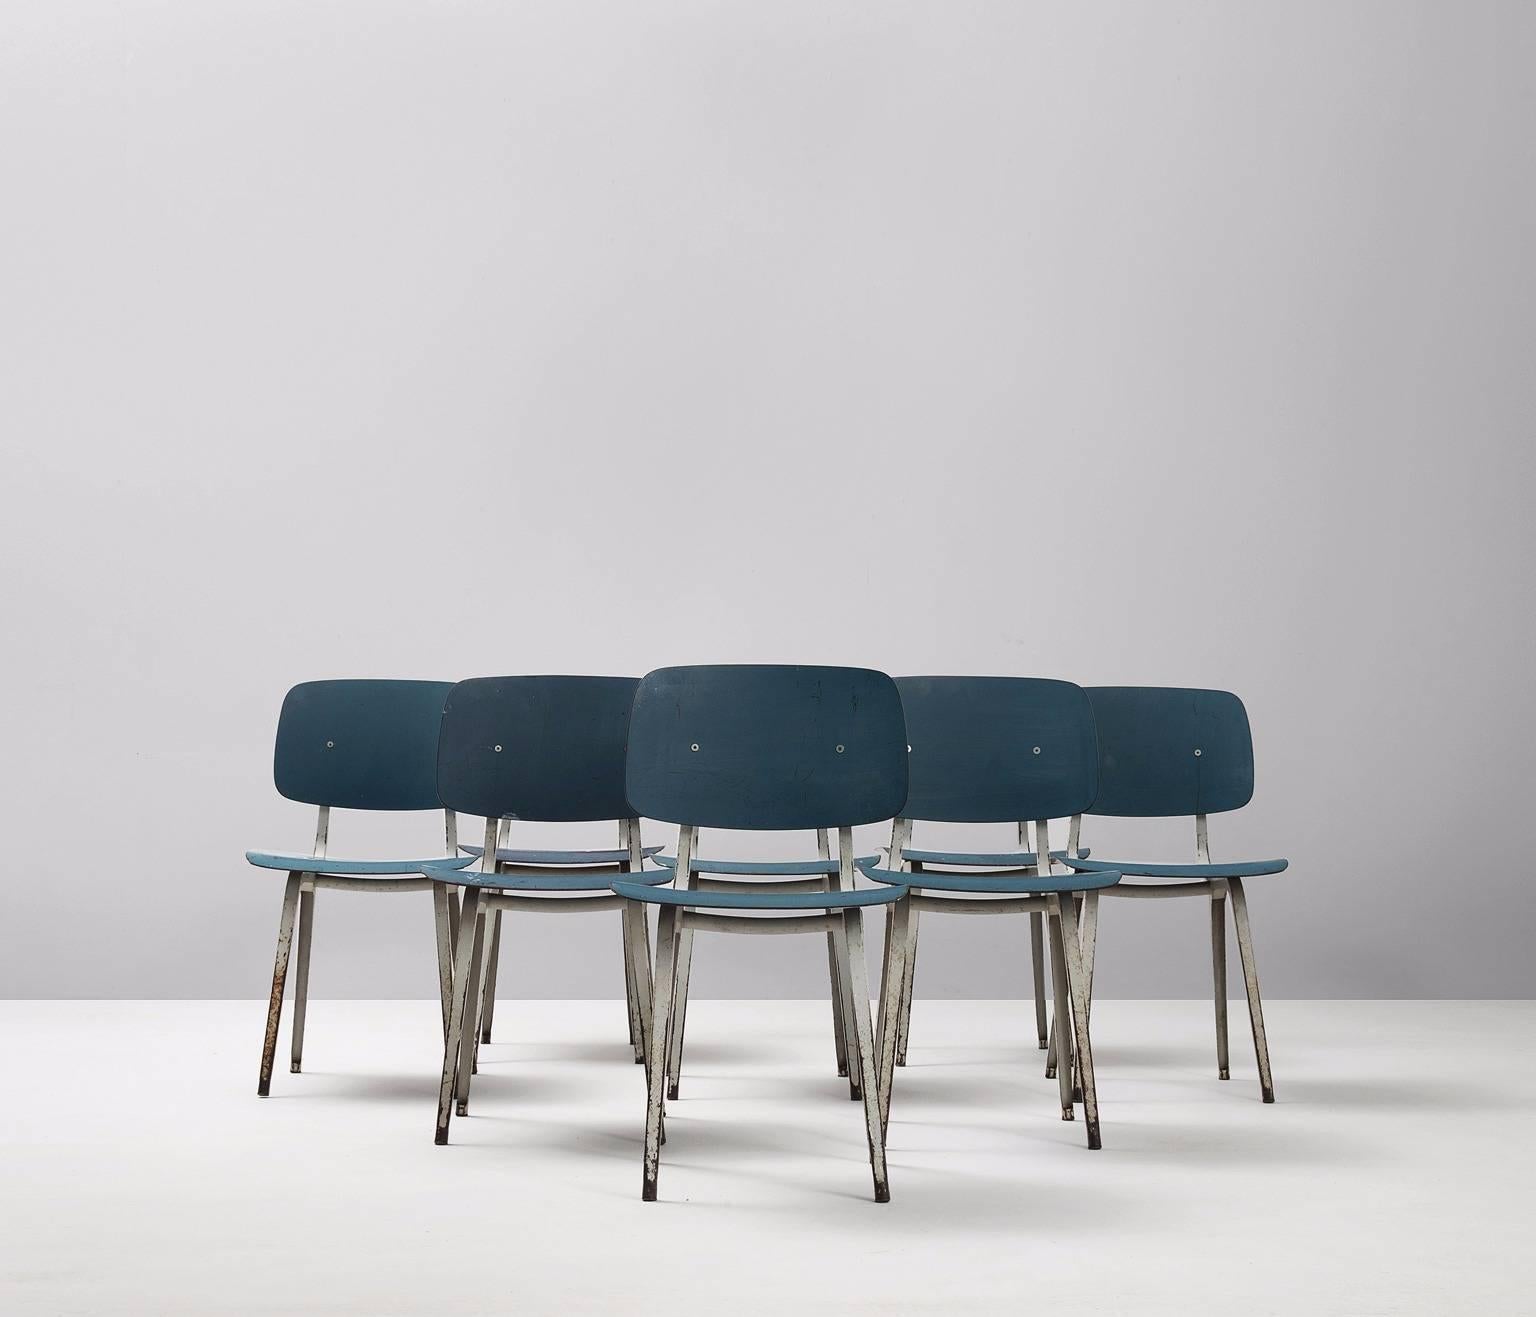 Set of eight chairs, model Revolt, plywood and metal, by Friso Kramer for Ahrend De Cirkel, the Netherlands 1953. 

Eight blue lacquered Revolt chairs by Friso Kramer. The frame is made of profiled sheet metal, coated in light grey. The seat and